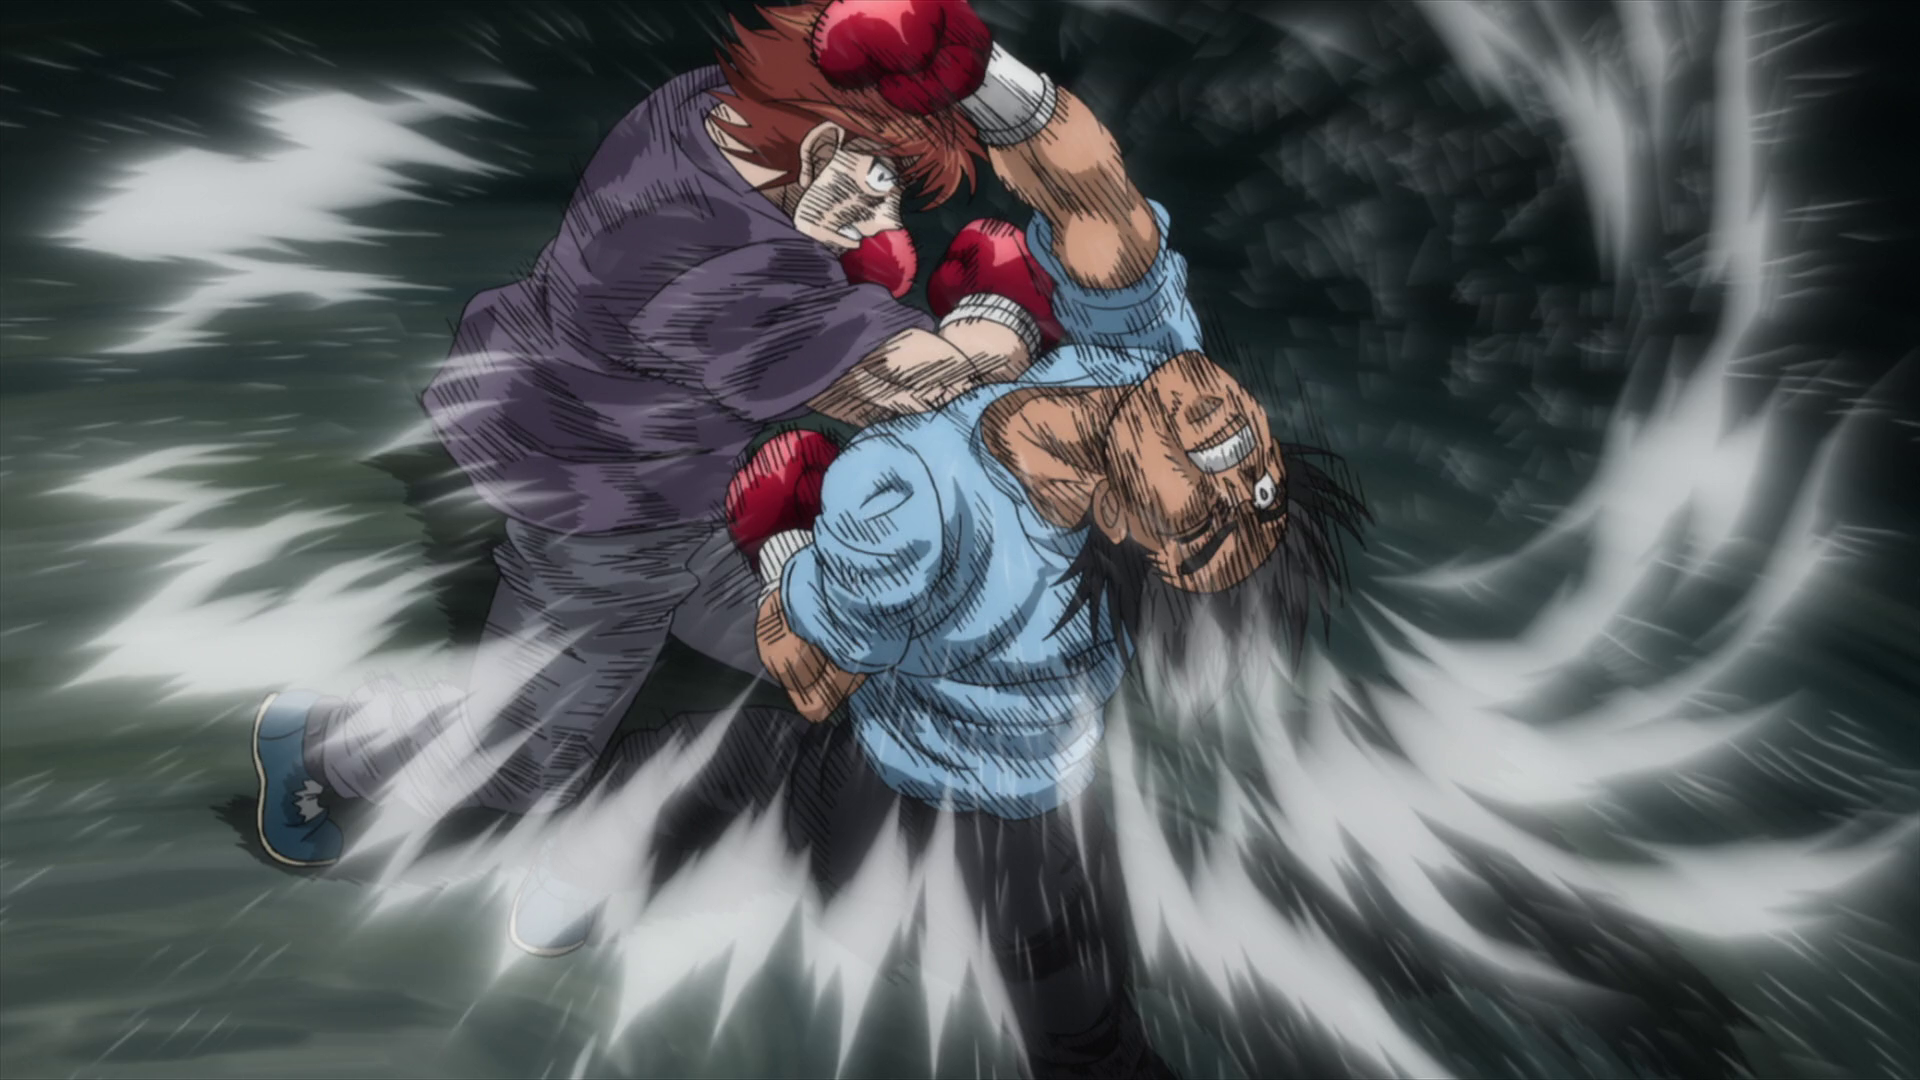 All or nothing! Ippo vs Volg FINAL MOMENTS